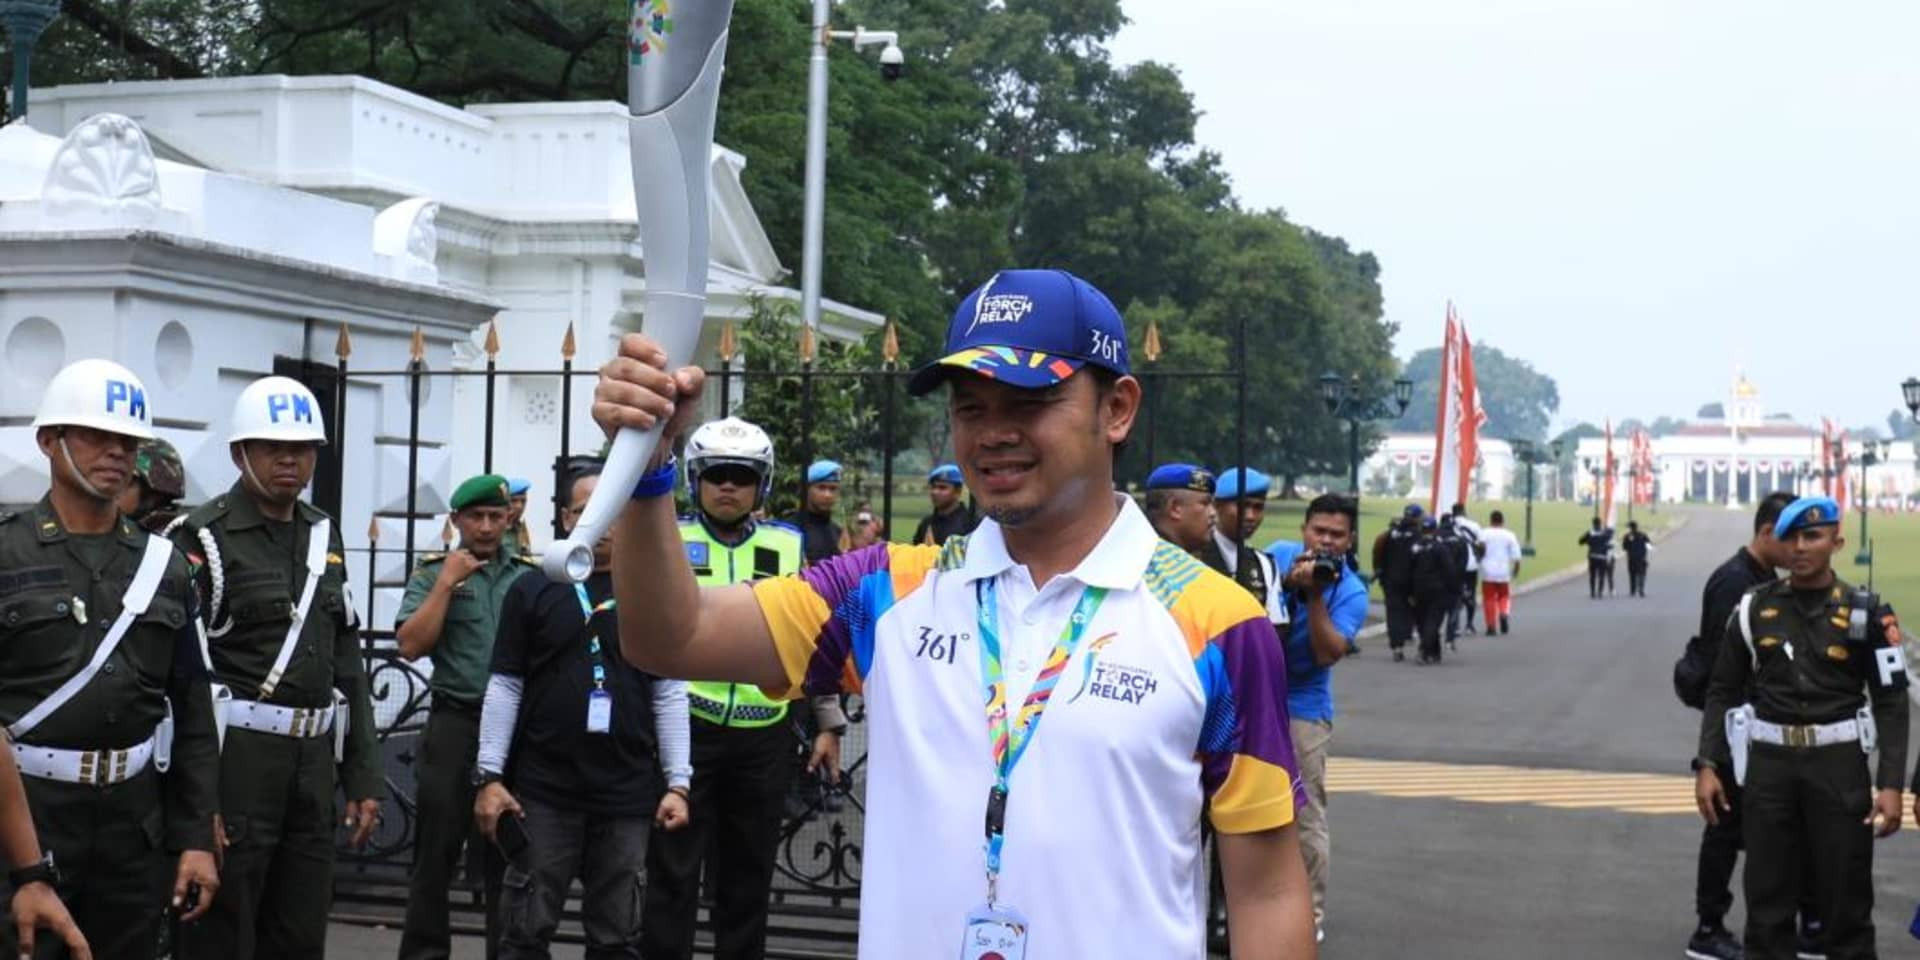 Asian Games Torch Relay continues with journey from Cianjur to Cipanas